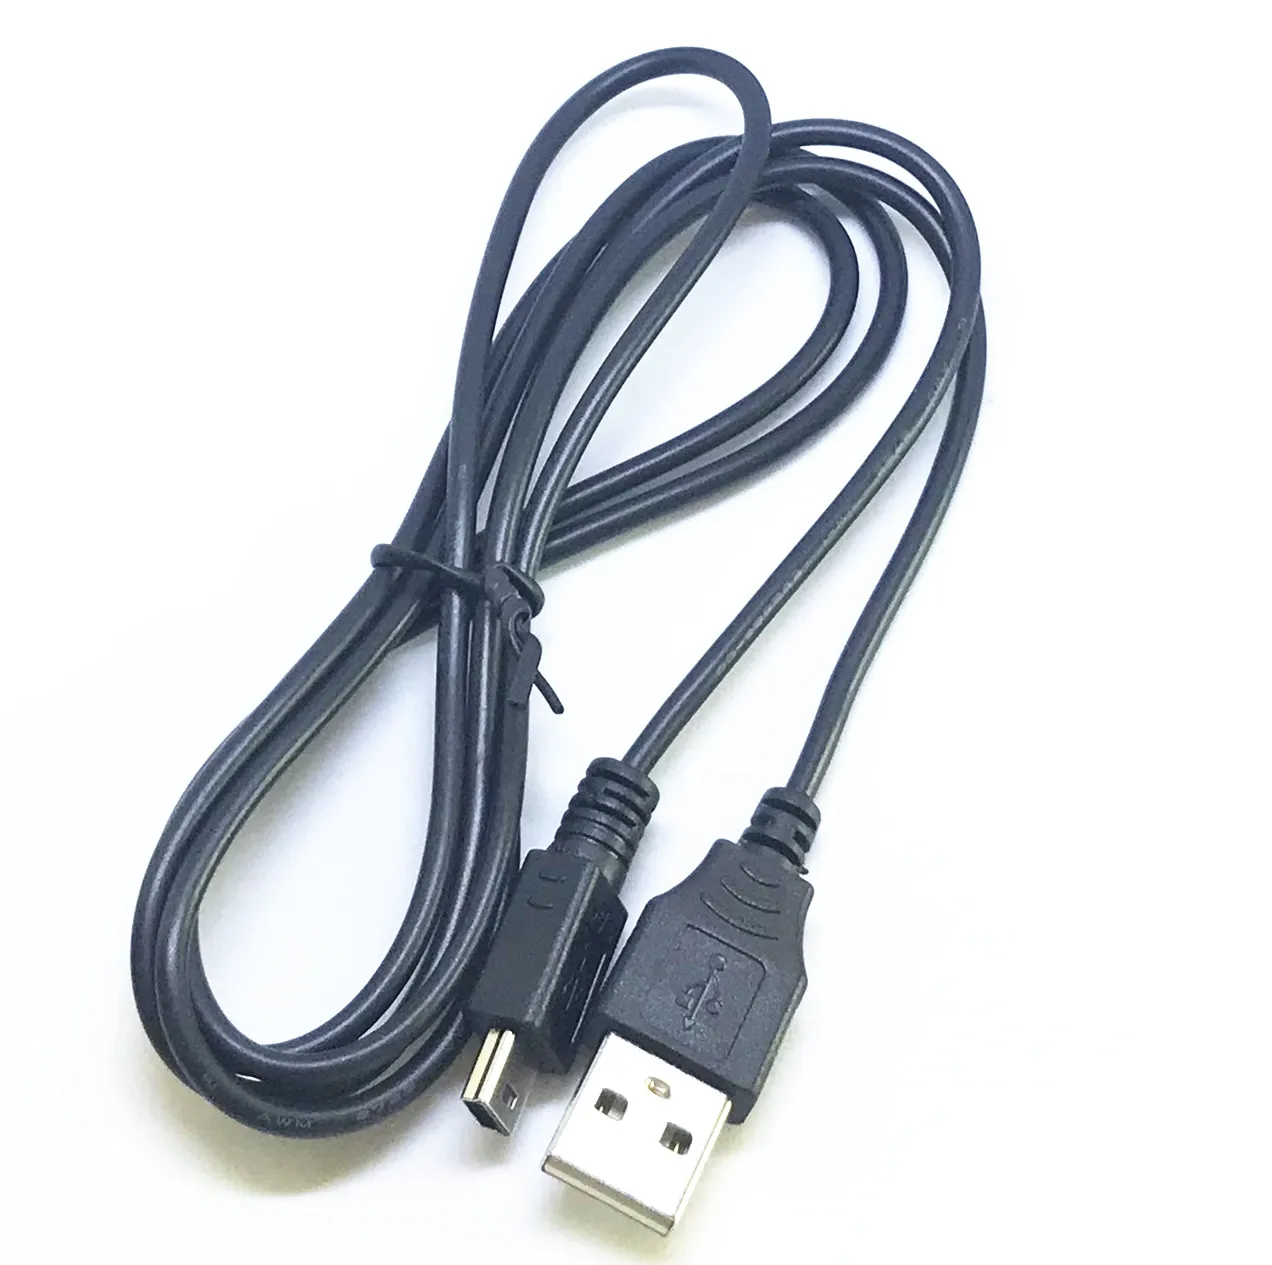 

Black & White USB Data Sync Cable for SONY DCR-HC21 DCR-HC26 DCR-HC30 DCR-HC32